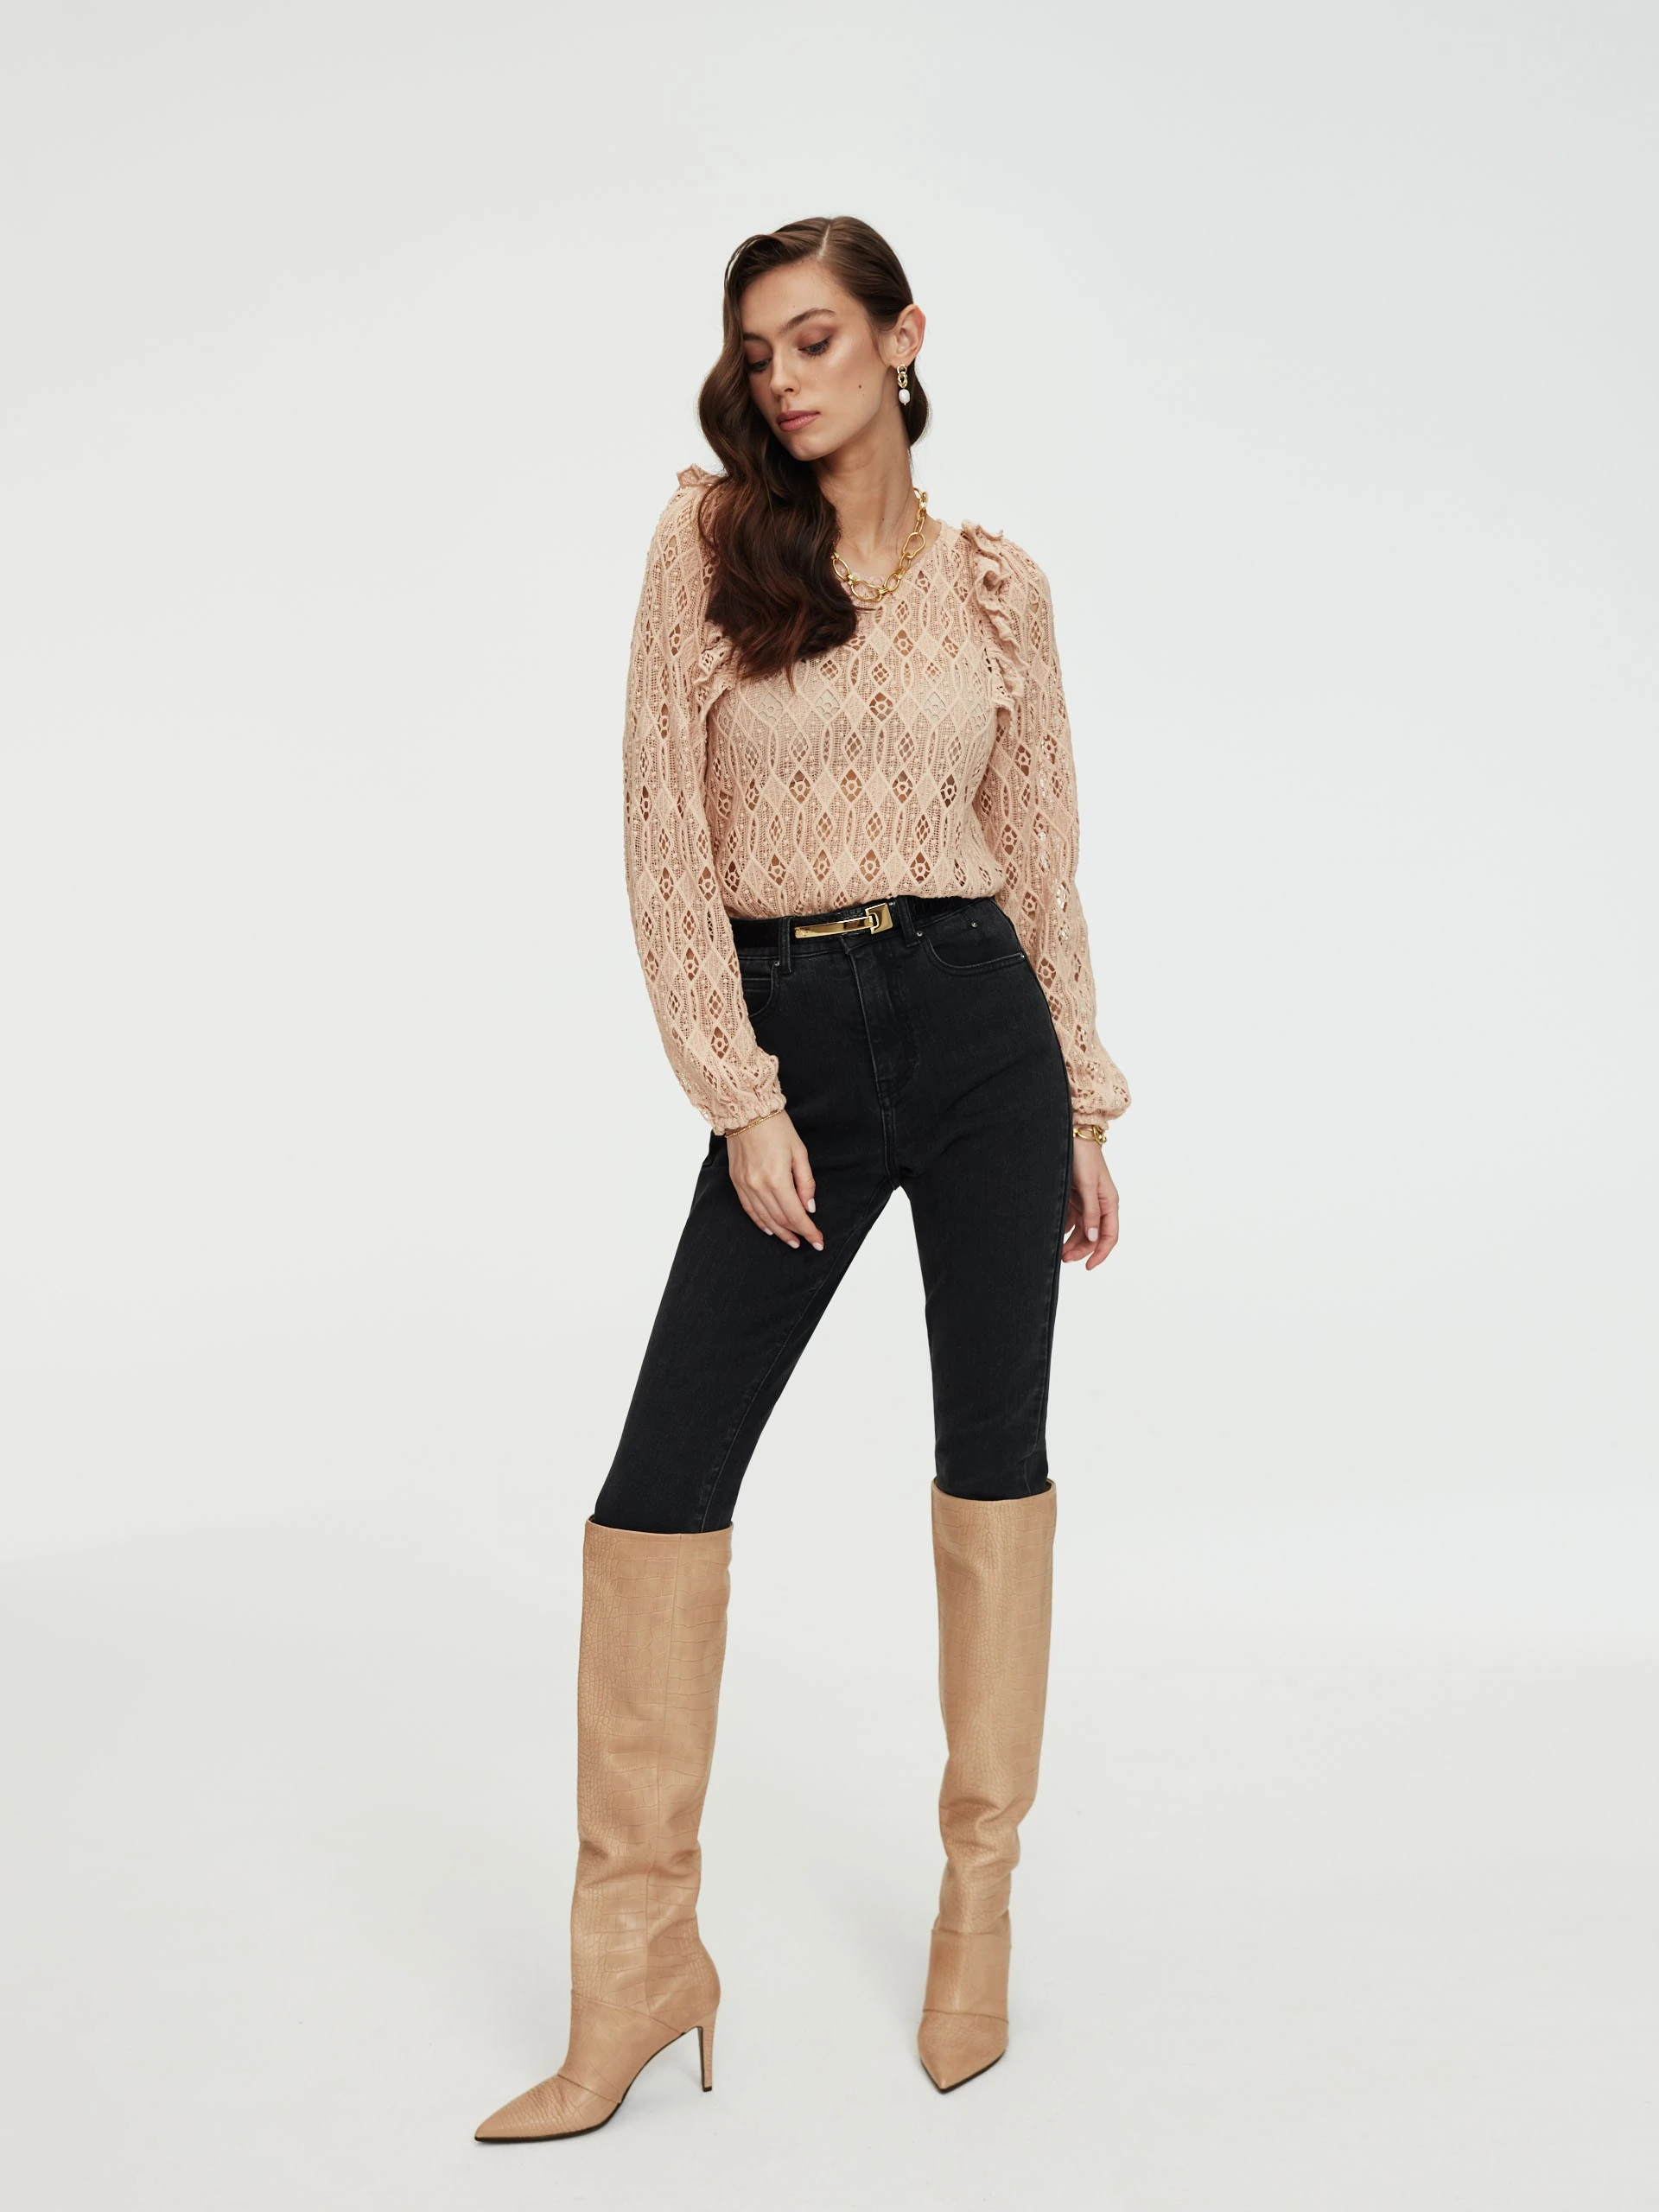 Pink laced blouse